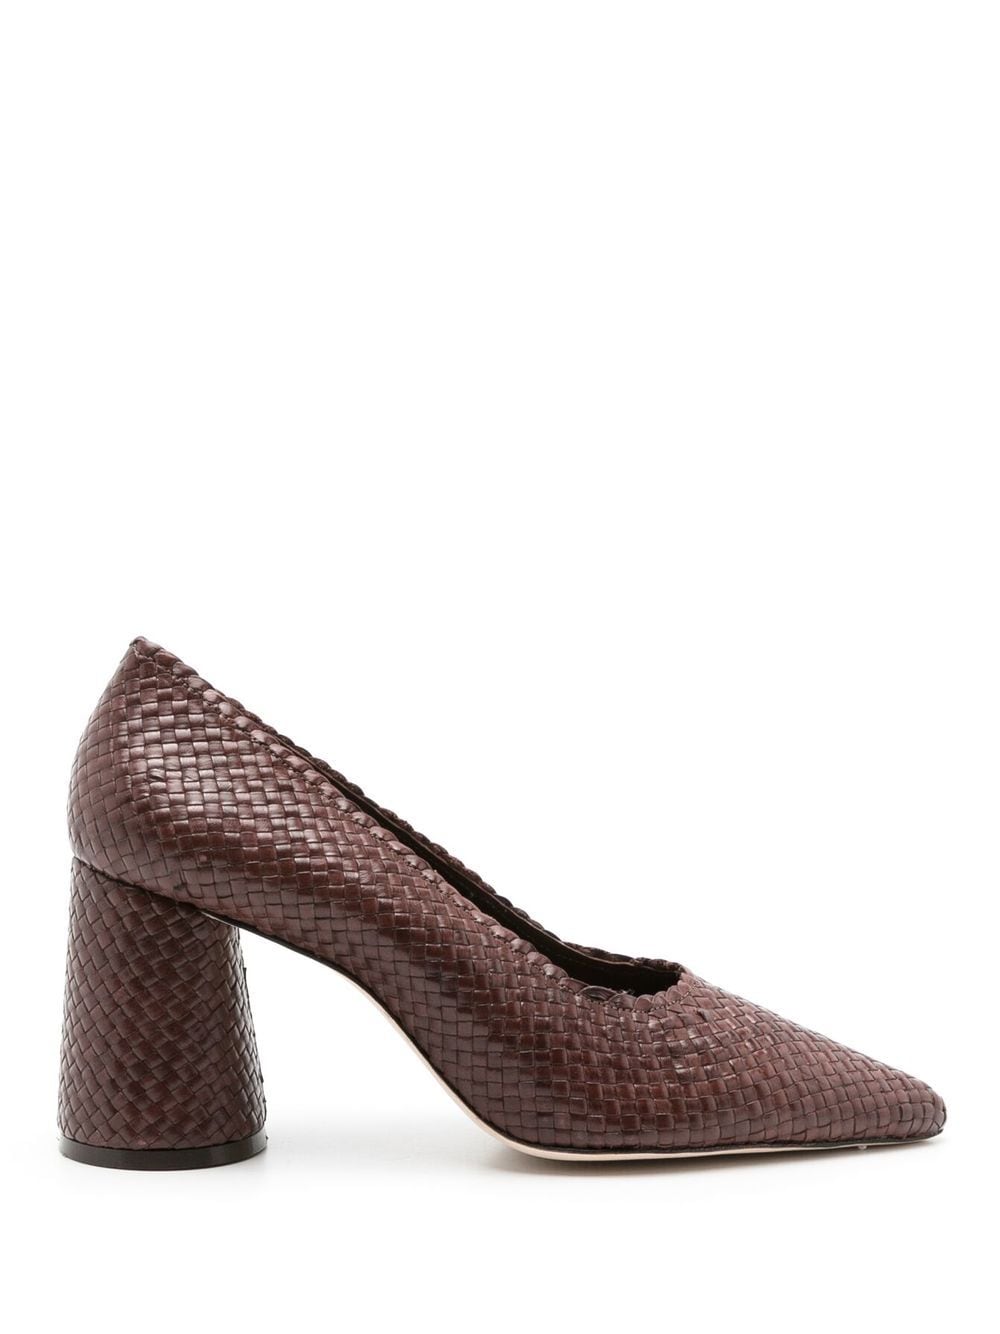 Sarah Chofakian 85mm Scapin Liam Interwoven Pumps In Brown